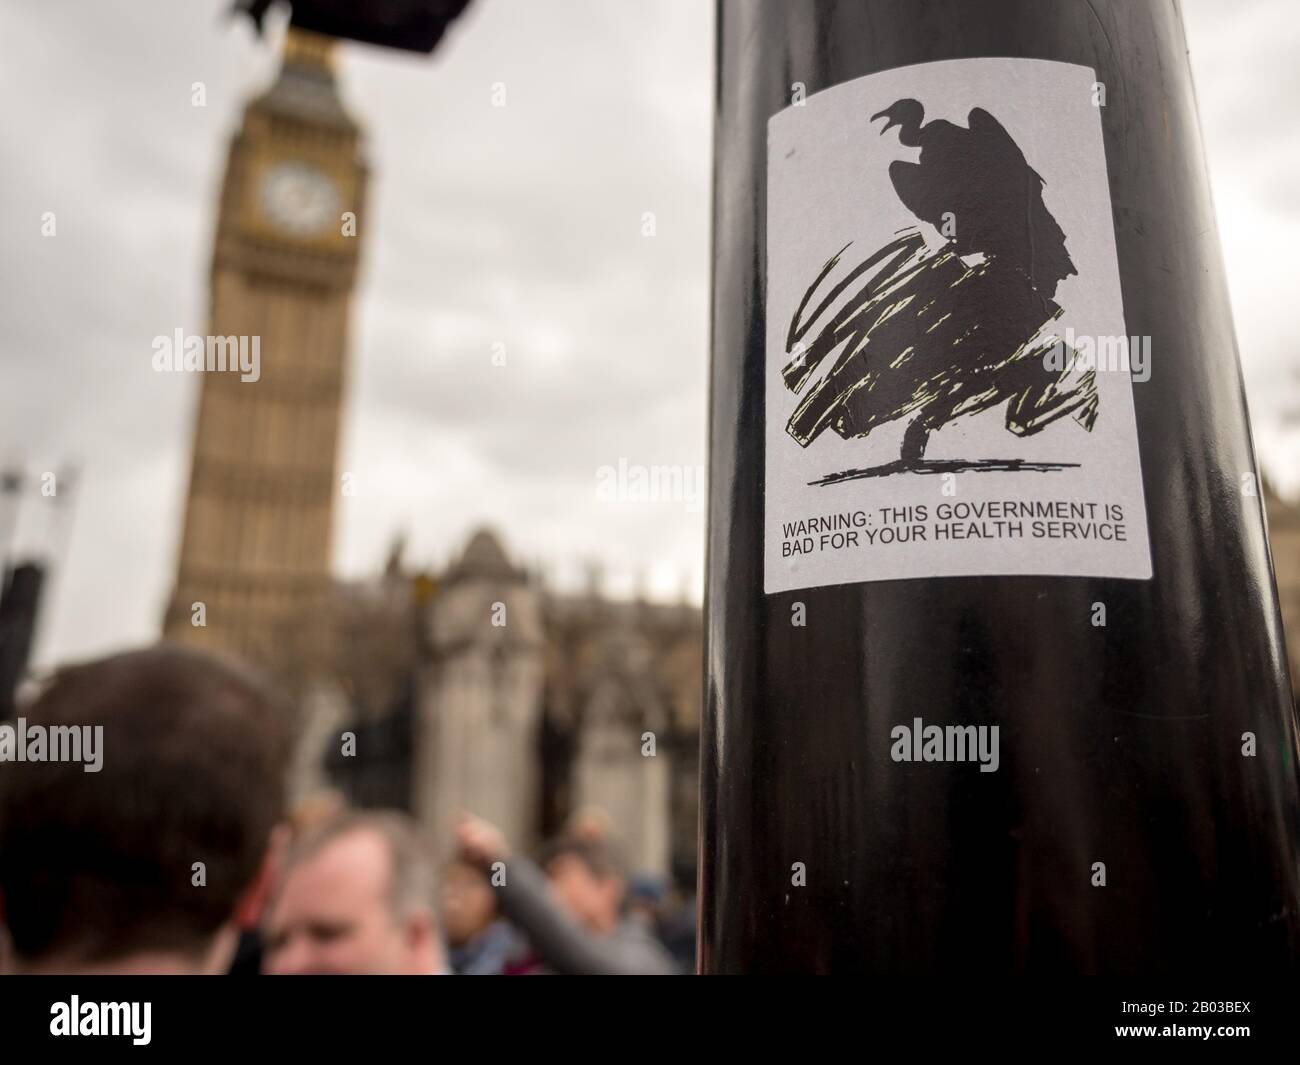 Street art satirising the UK Conservative Government's affects on the National Health Service with Big Ben in the background blur. Stock Photo